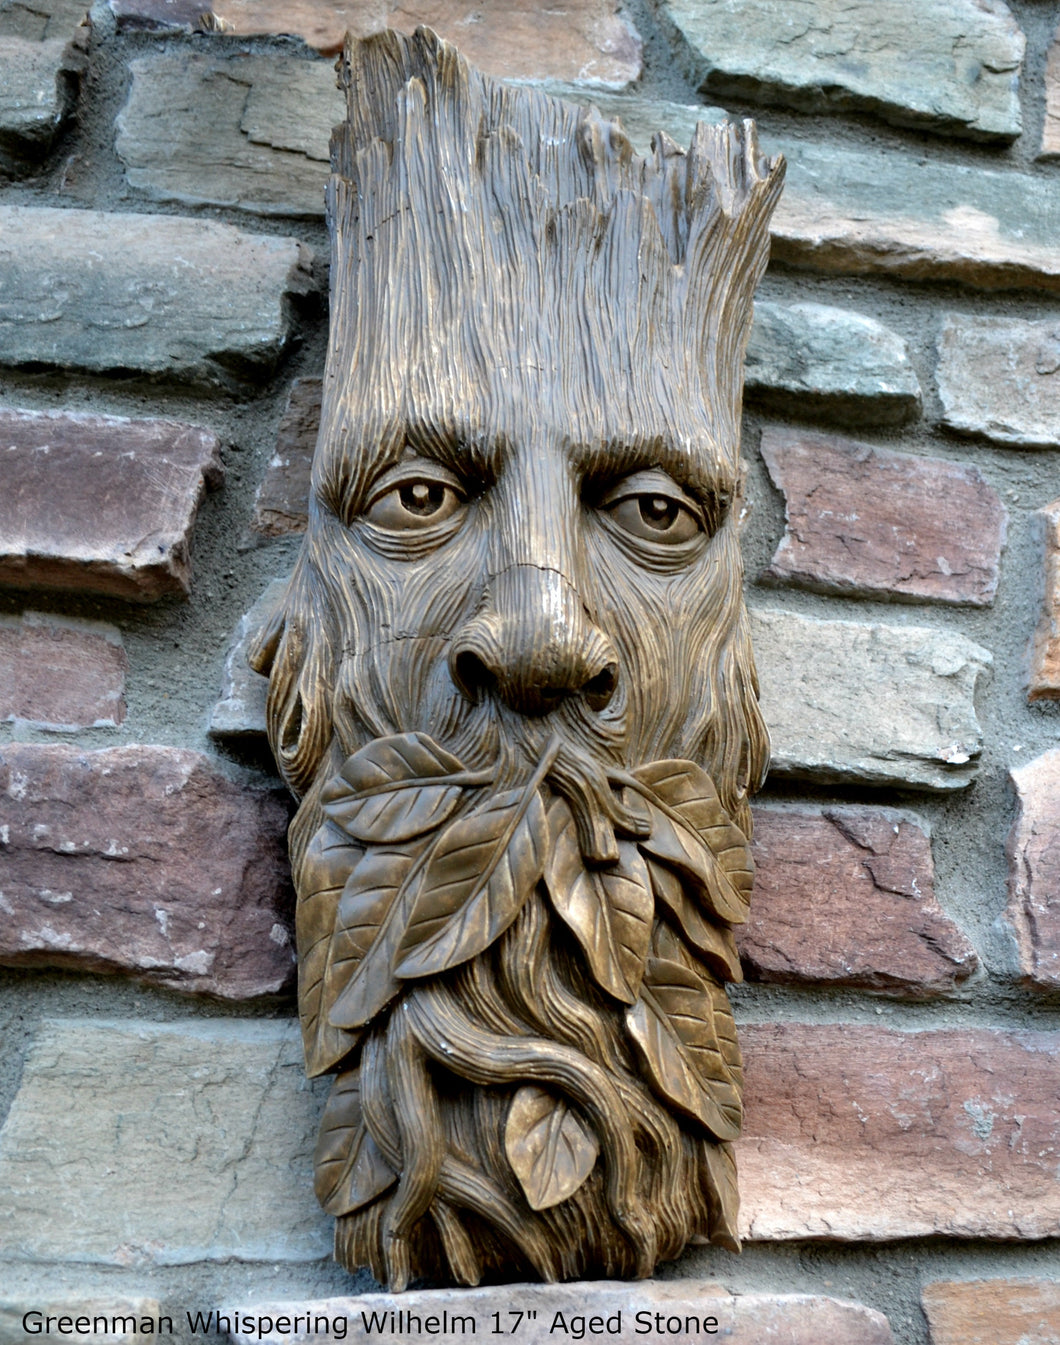 Greenman Whispering Wilhelm green man Tree Sculptural wall relief carving plaque www.Neo-Mfg.com 18